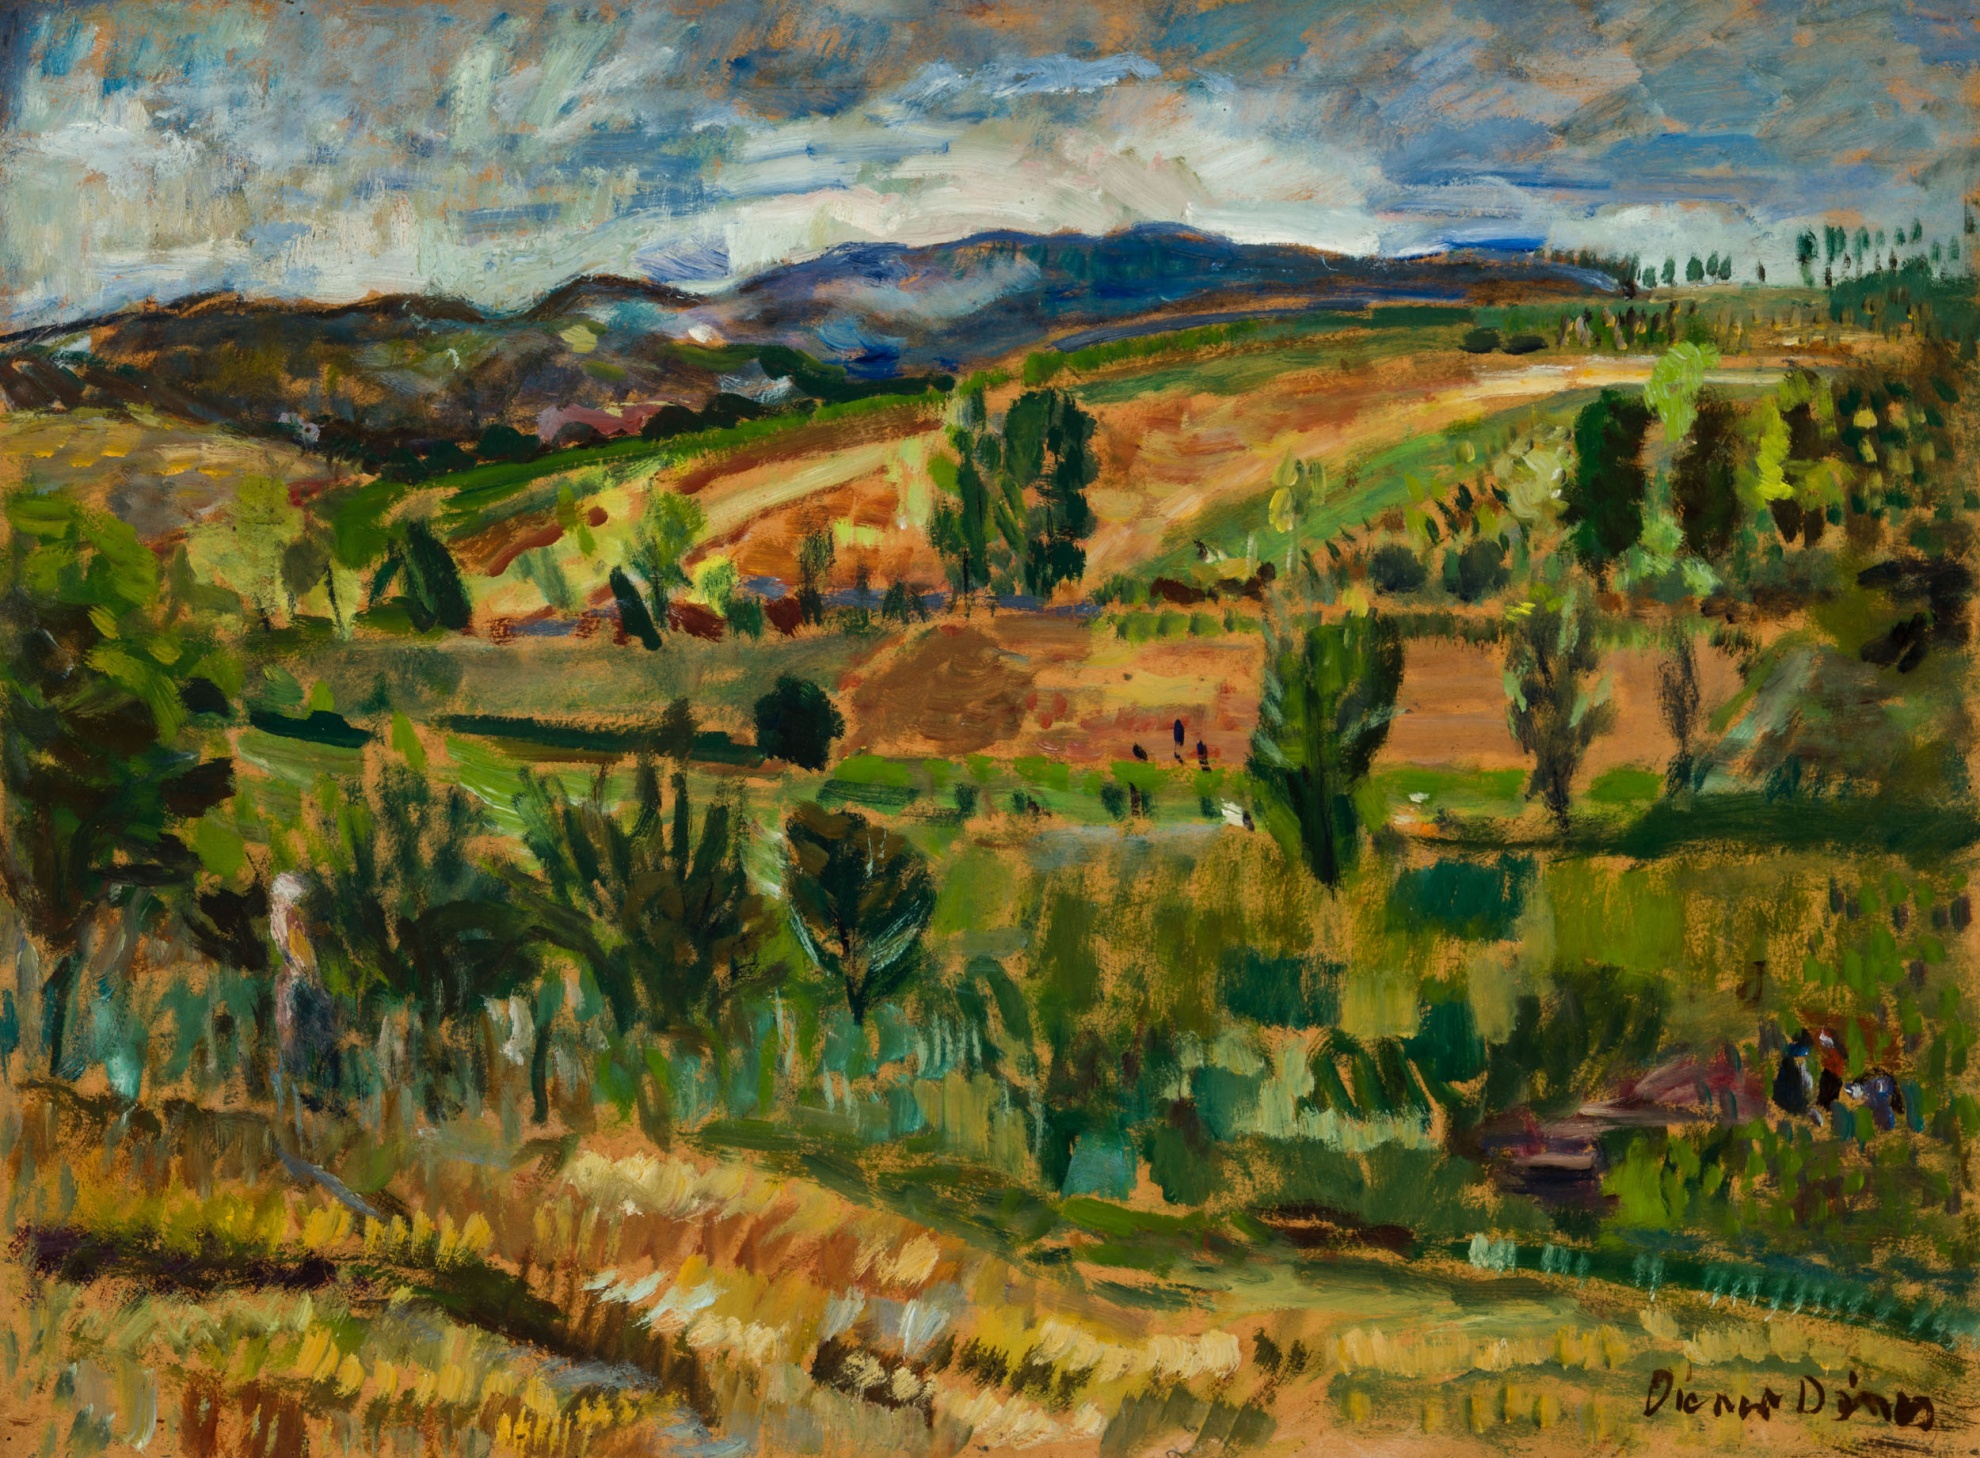 untitled (landscape with hills near Szentendre)

(The Salgo Trust for Education CC BY-NC-SA)